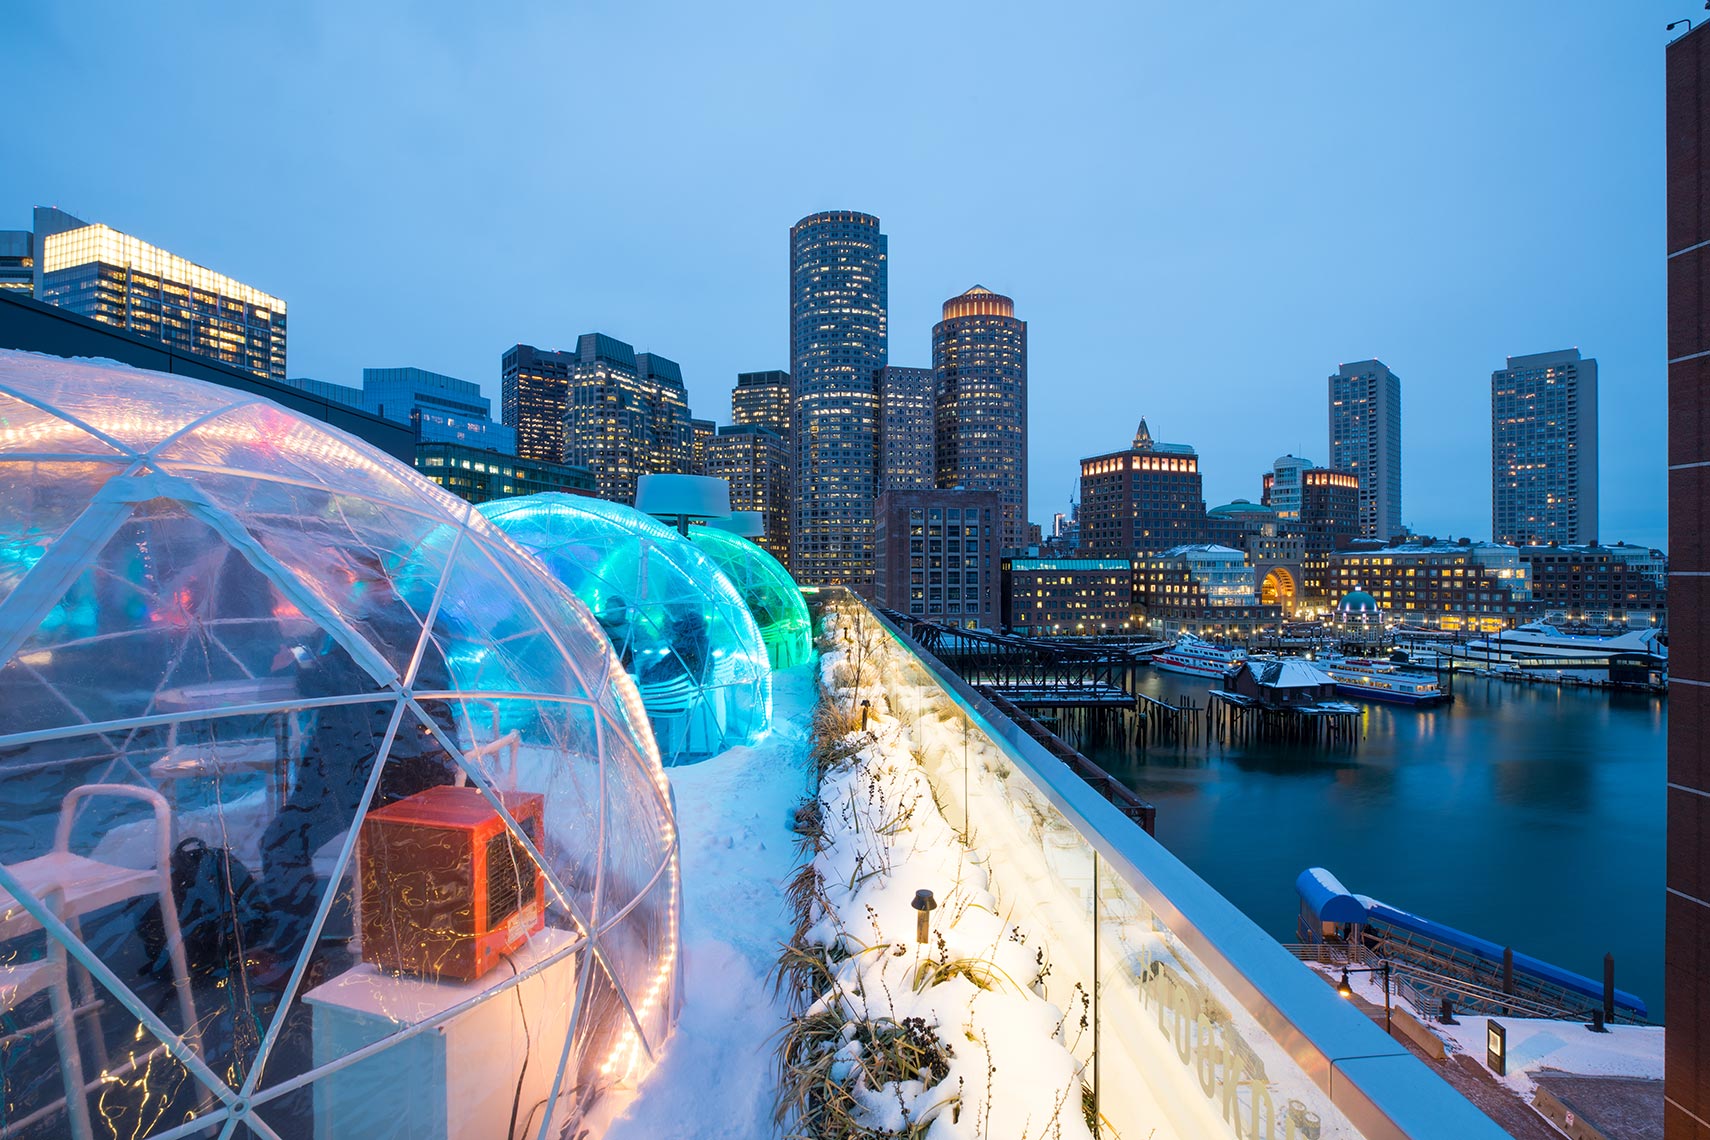 Igloos at Lookout Rooftop Bar with View of Boston Skyline By Best Hospitality Photographer Shannon O